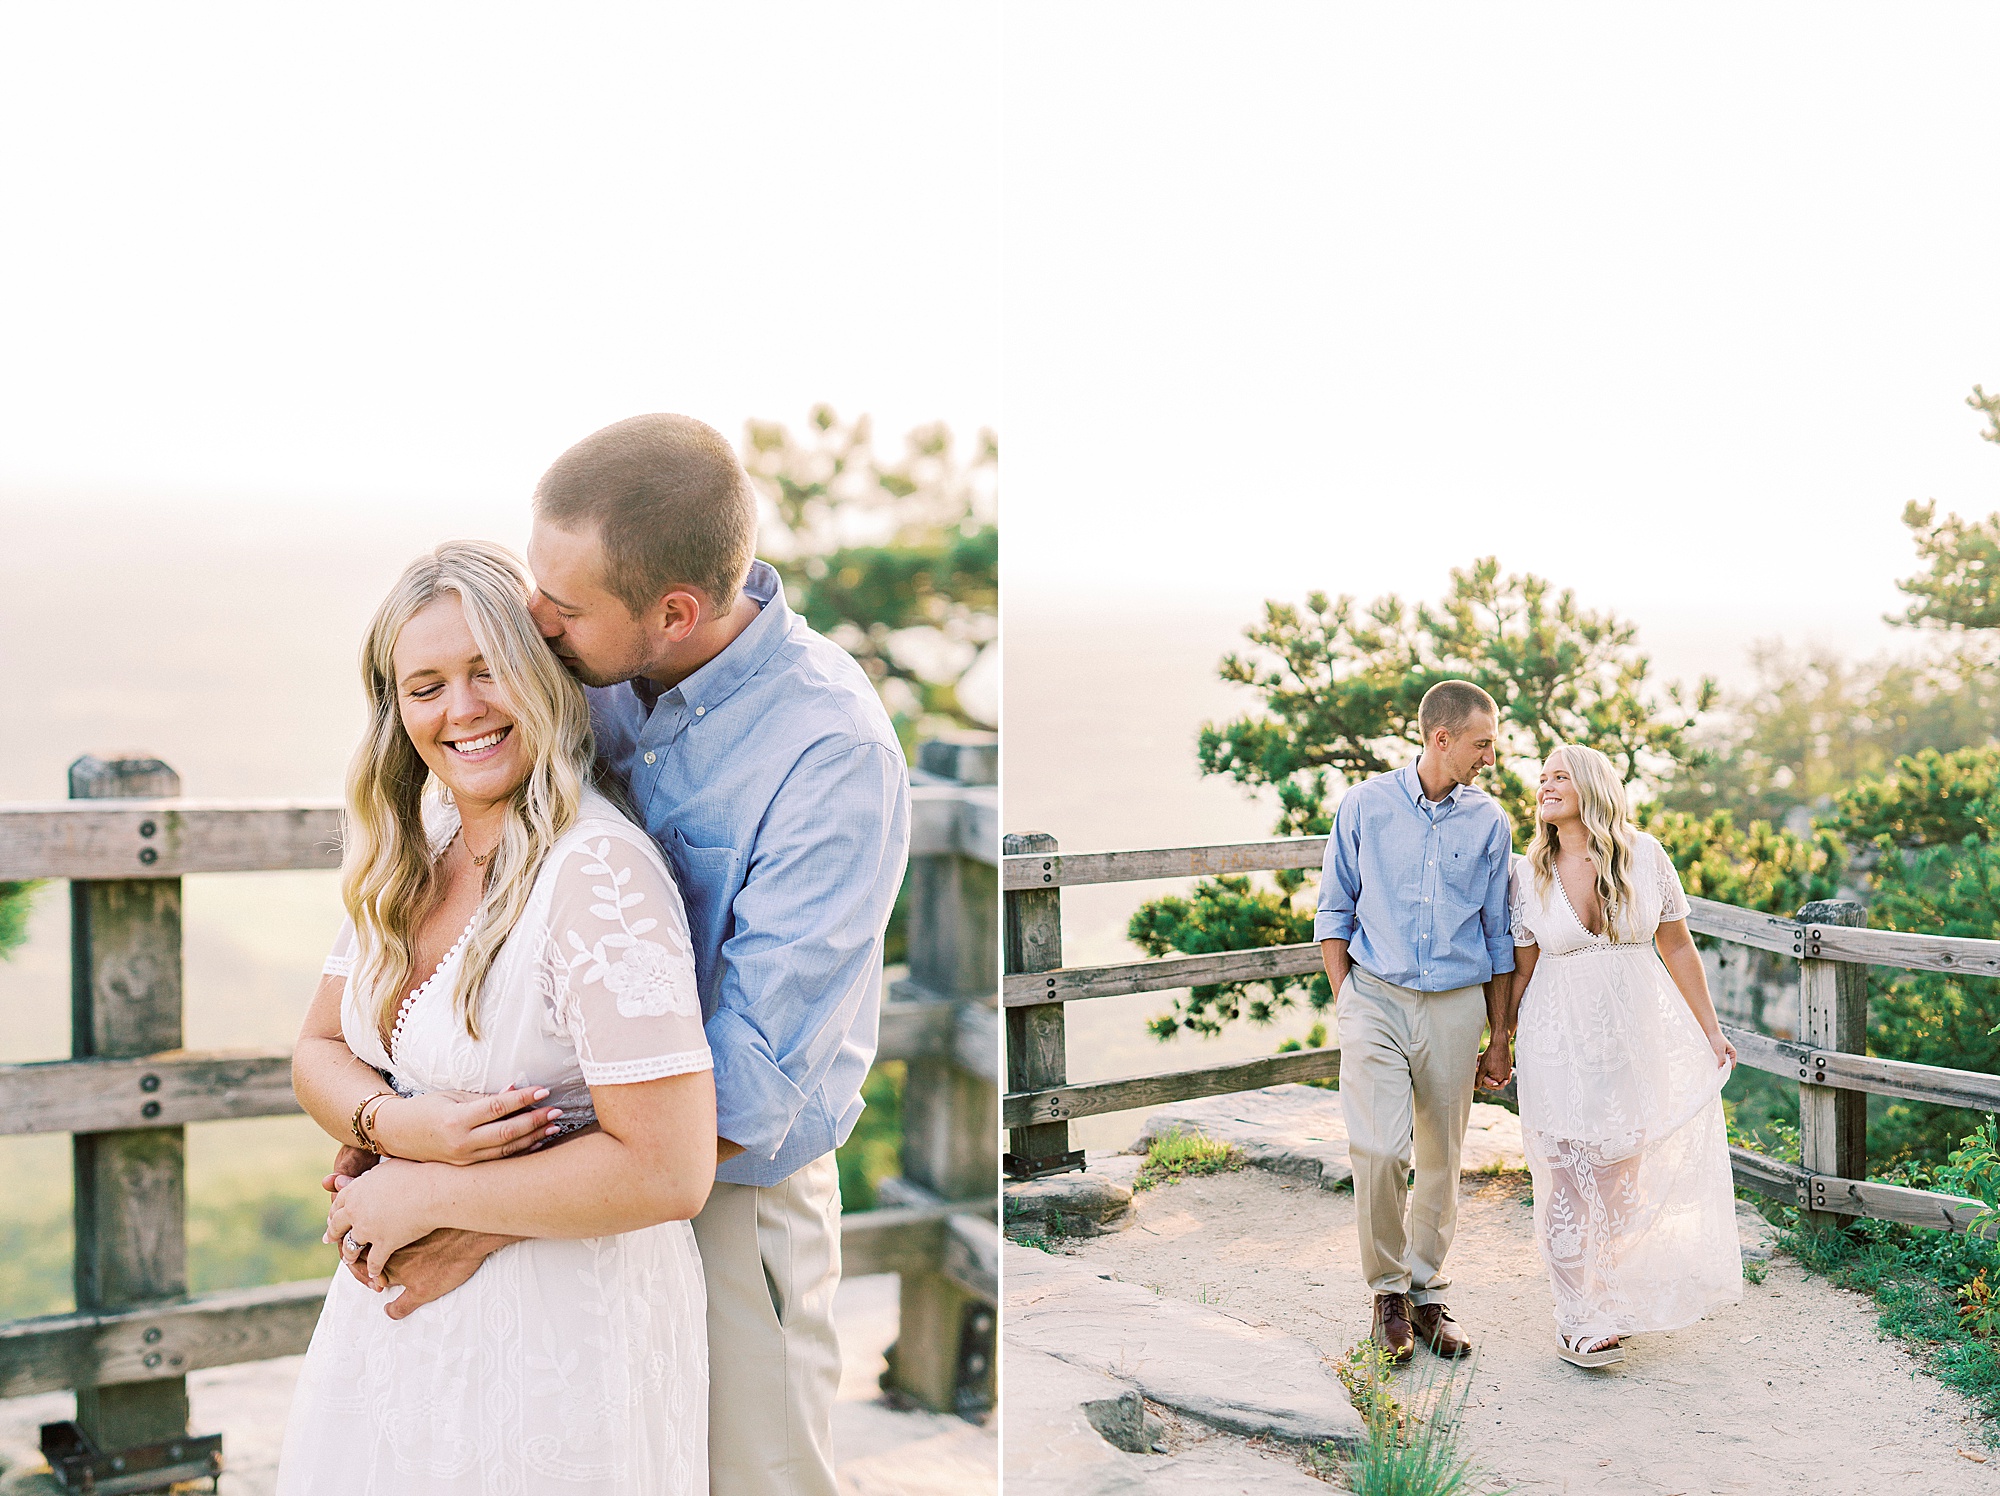 Mount Airy engagement session for couple at sunset